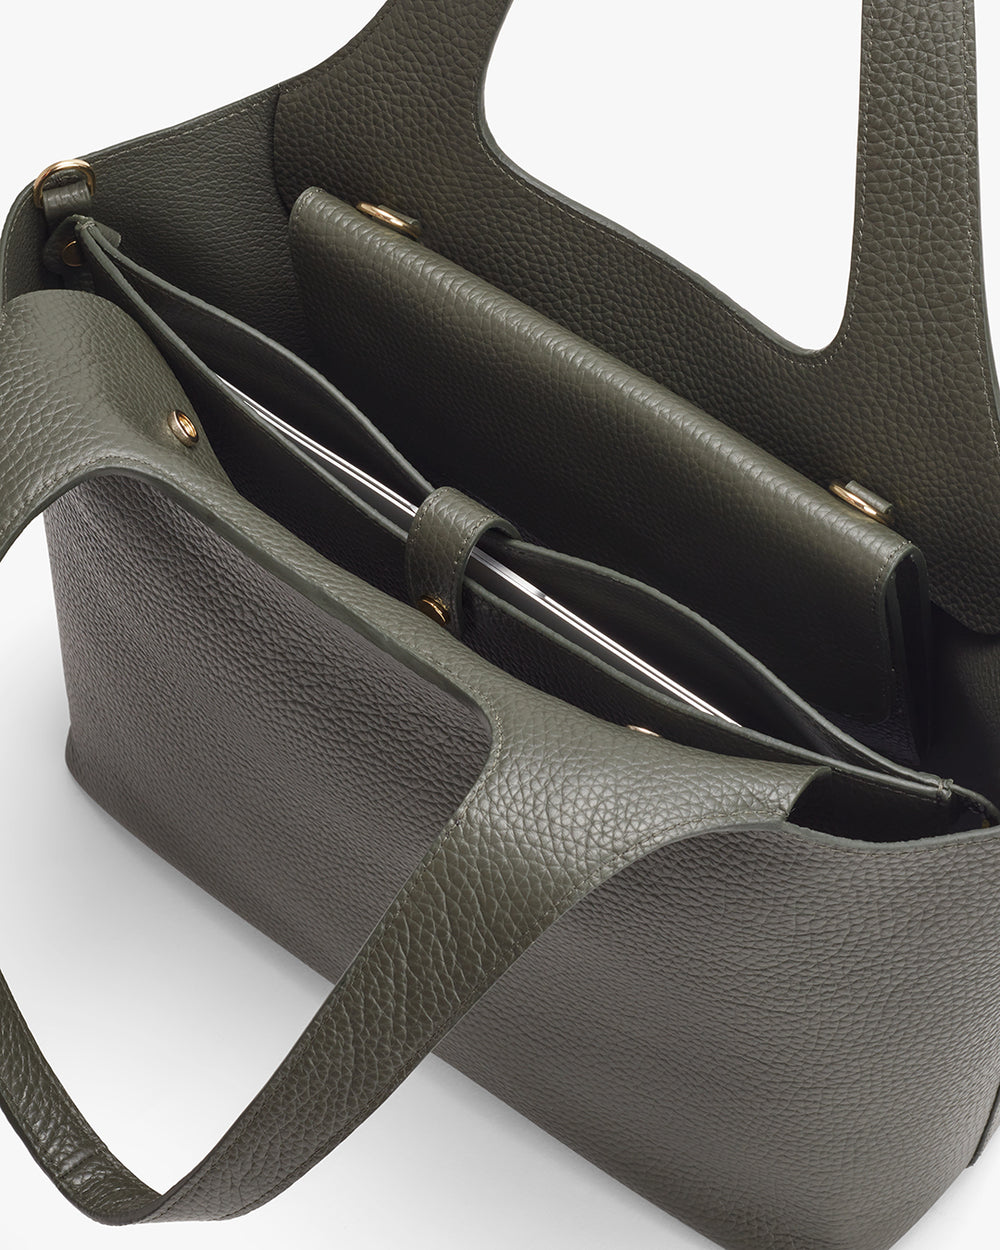 Overhead view of an open handbag with visible compartments.